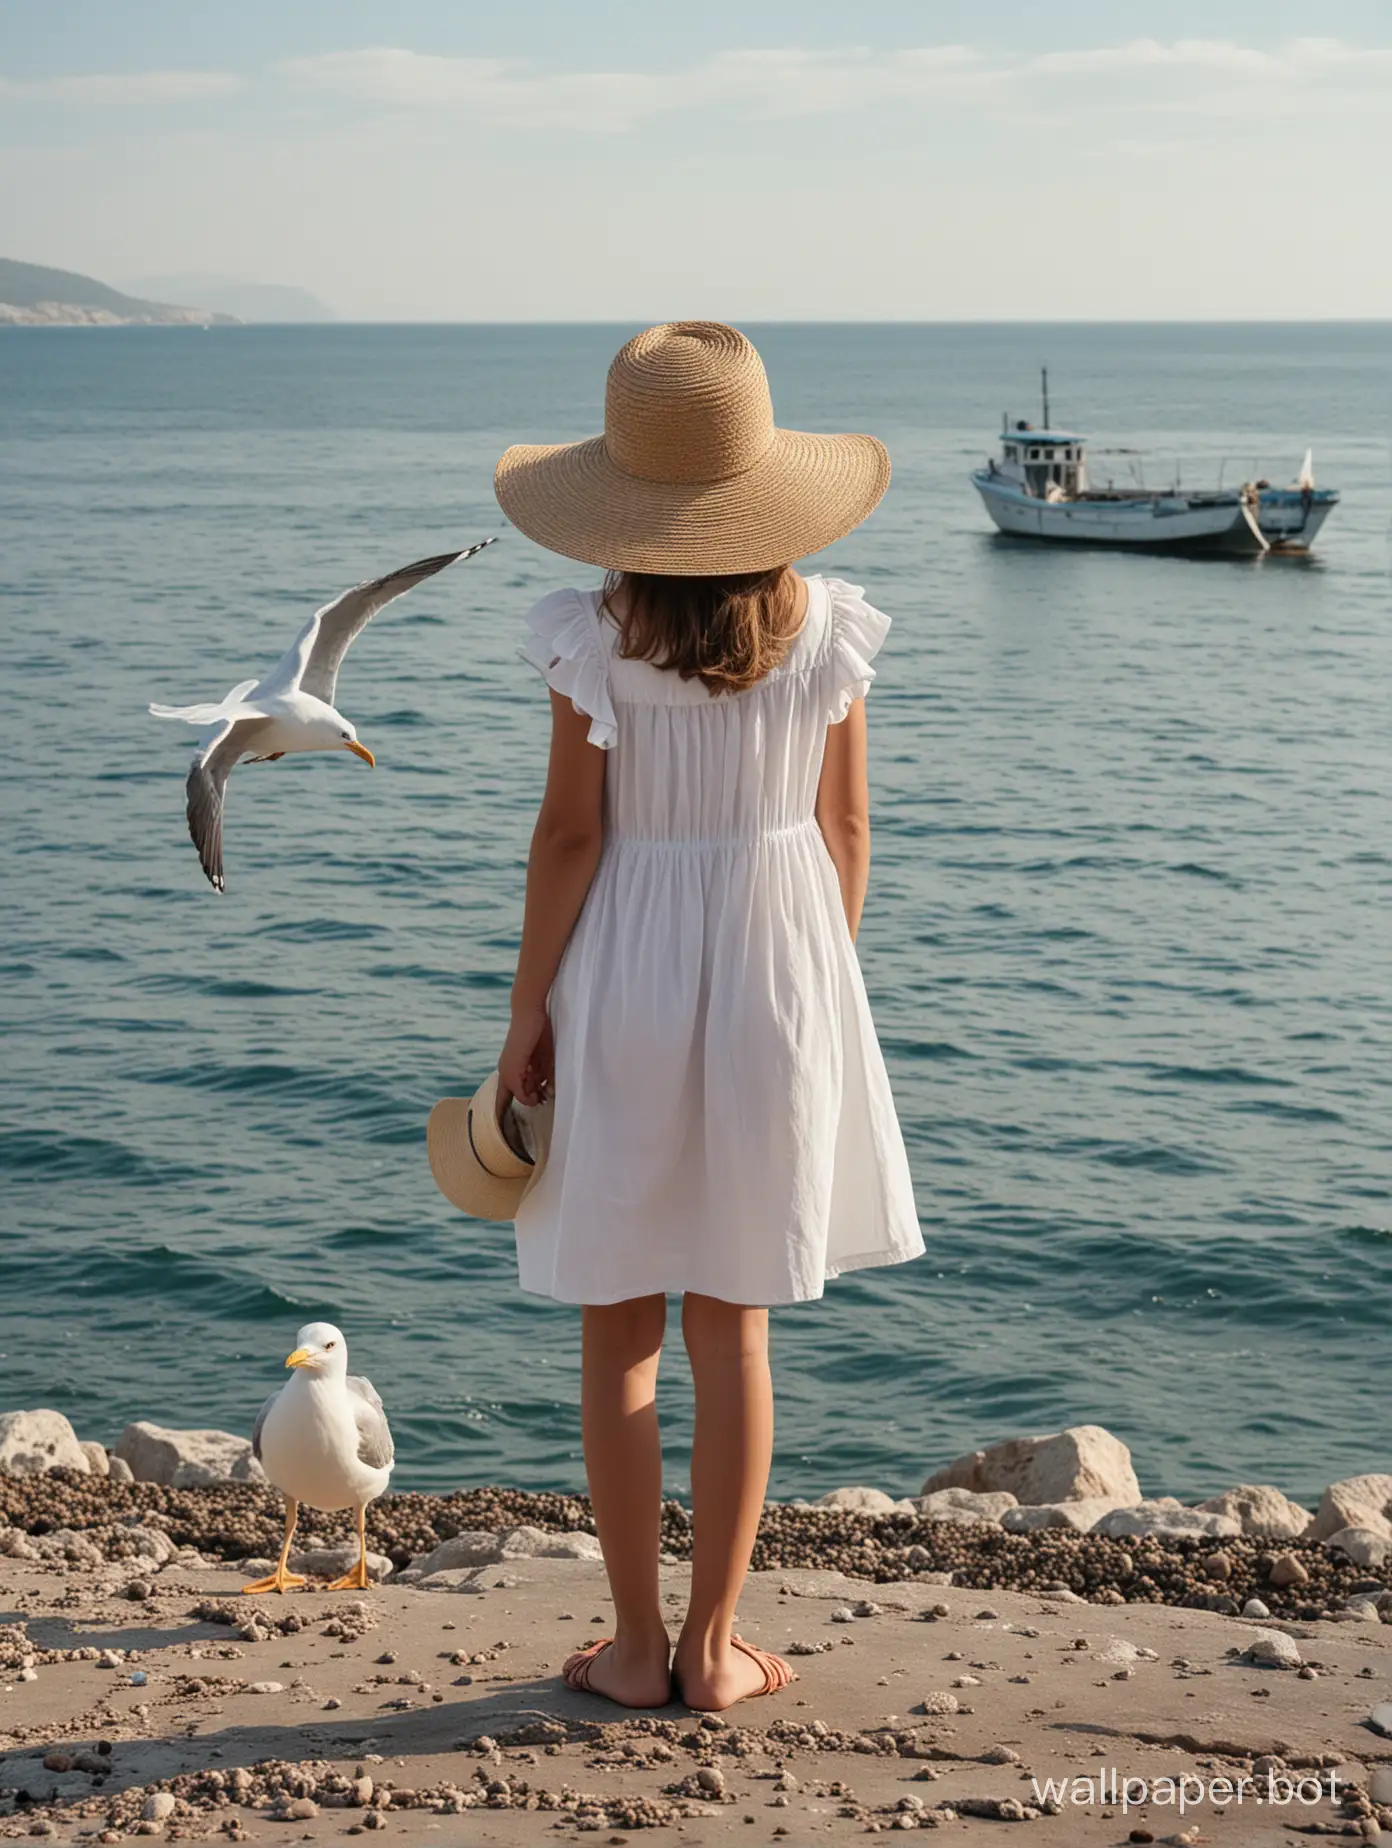 Black Sea, Crimea, a girl 11 years old in a summer dress and hat, seen from behind, full-length, a ship in the distance, seagull